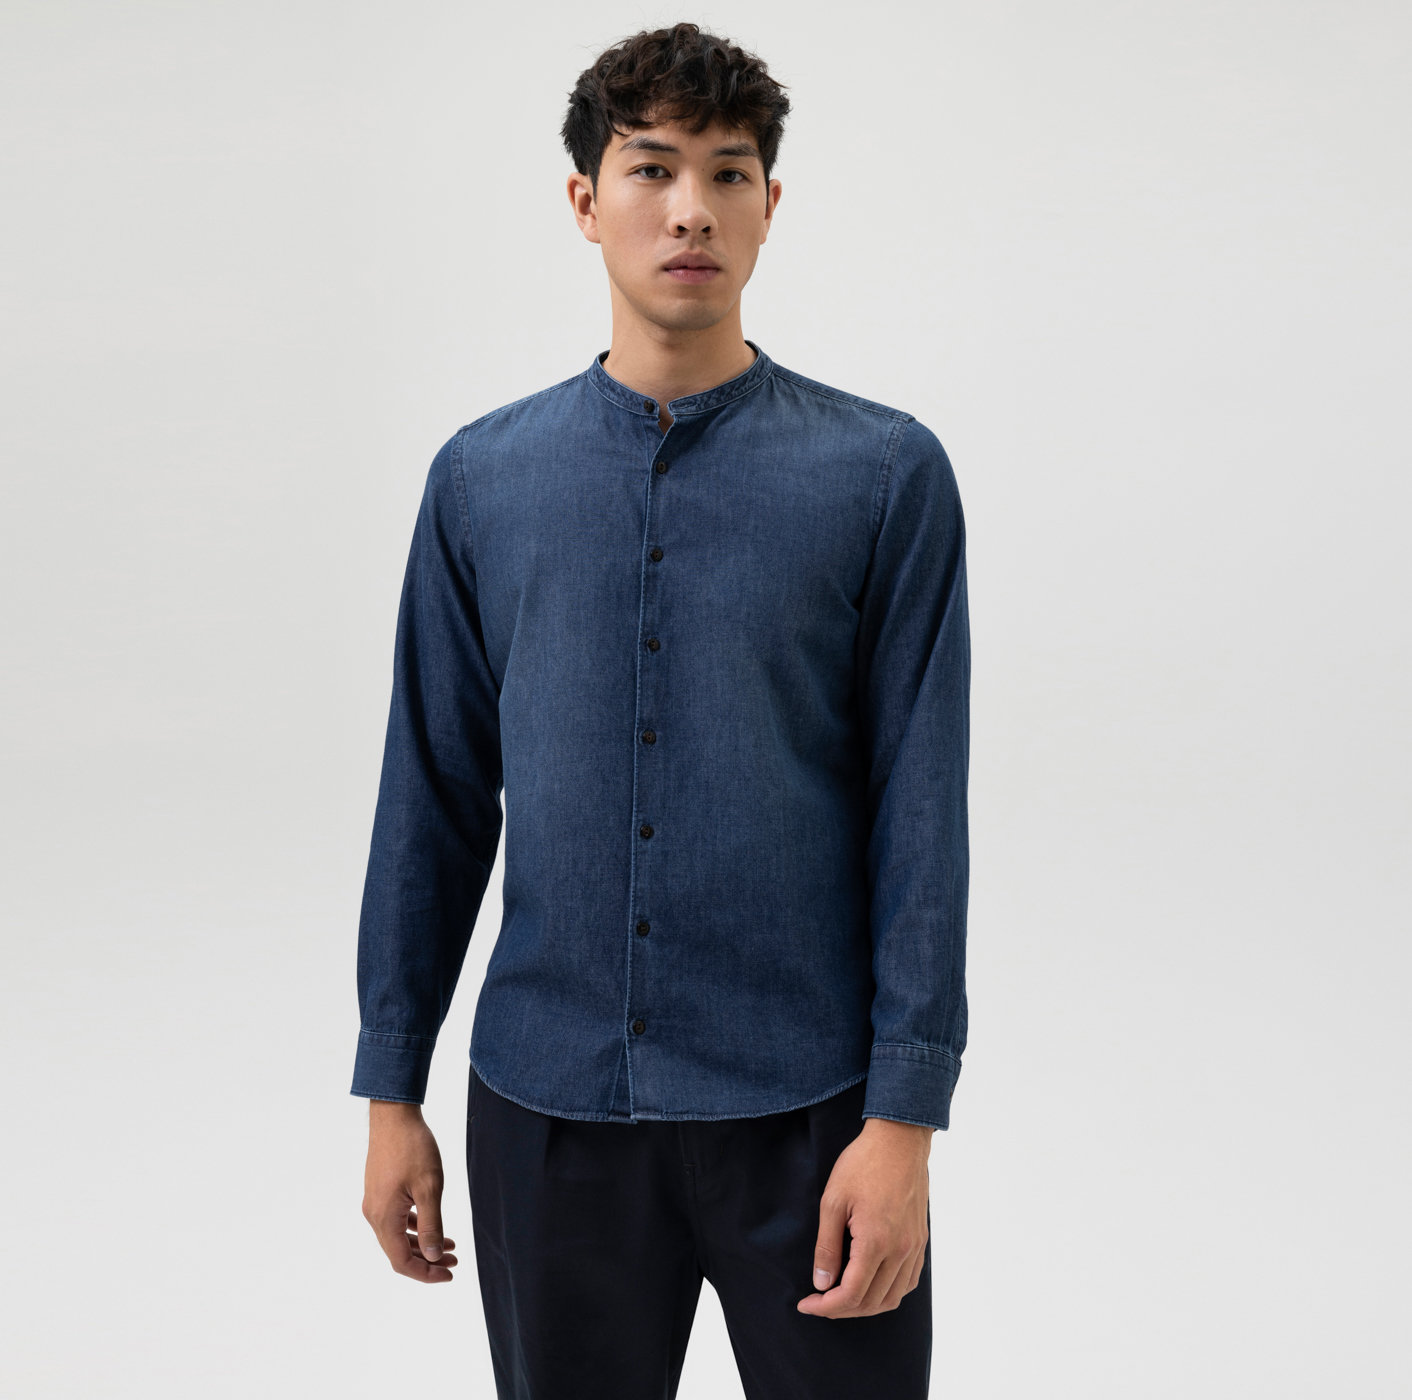 Casual shirt Level Smart Stand-up | body 32402496 fit, collar | Indigo OLYMP Five - Casual